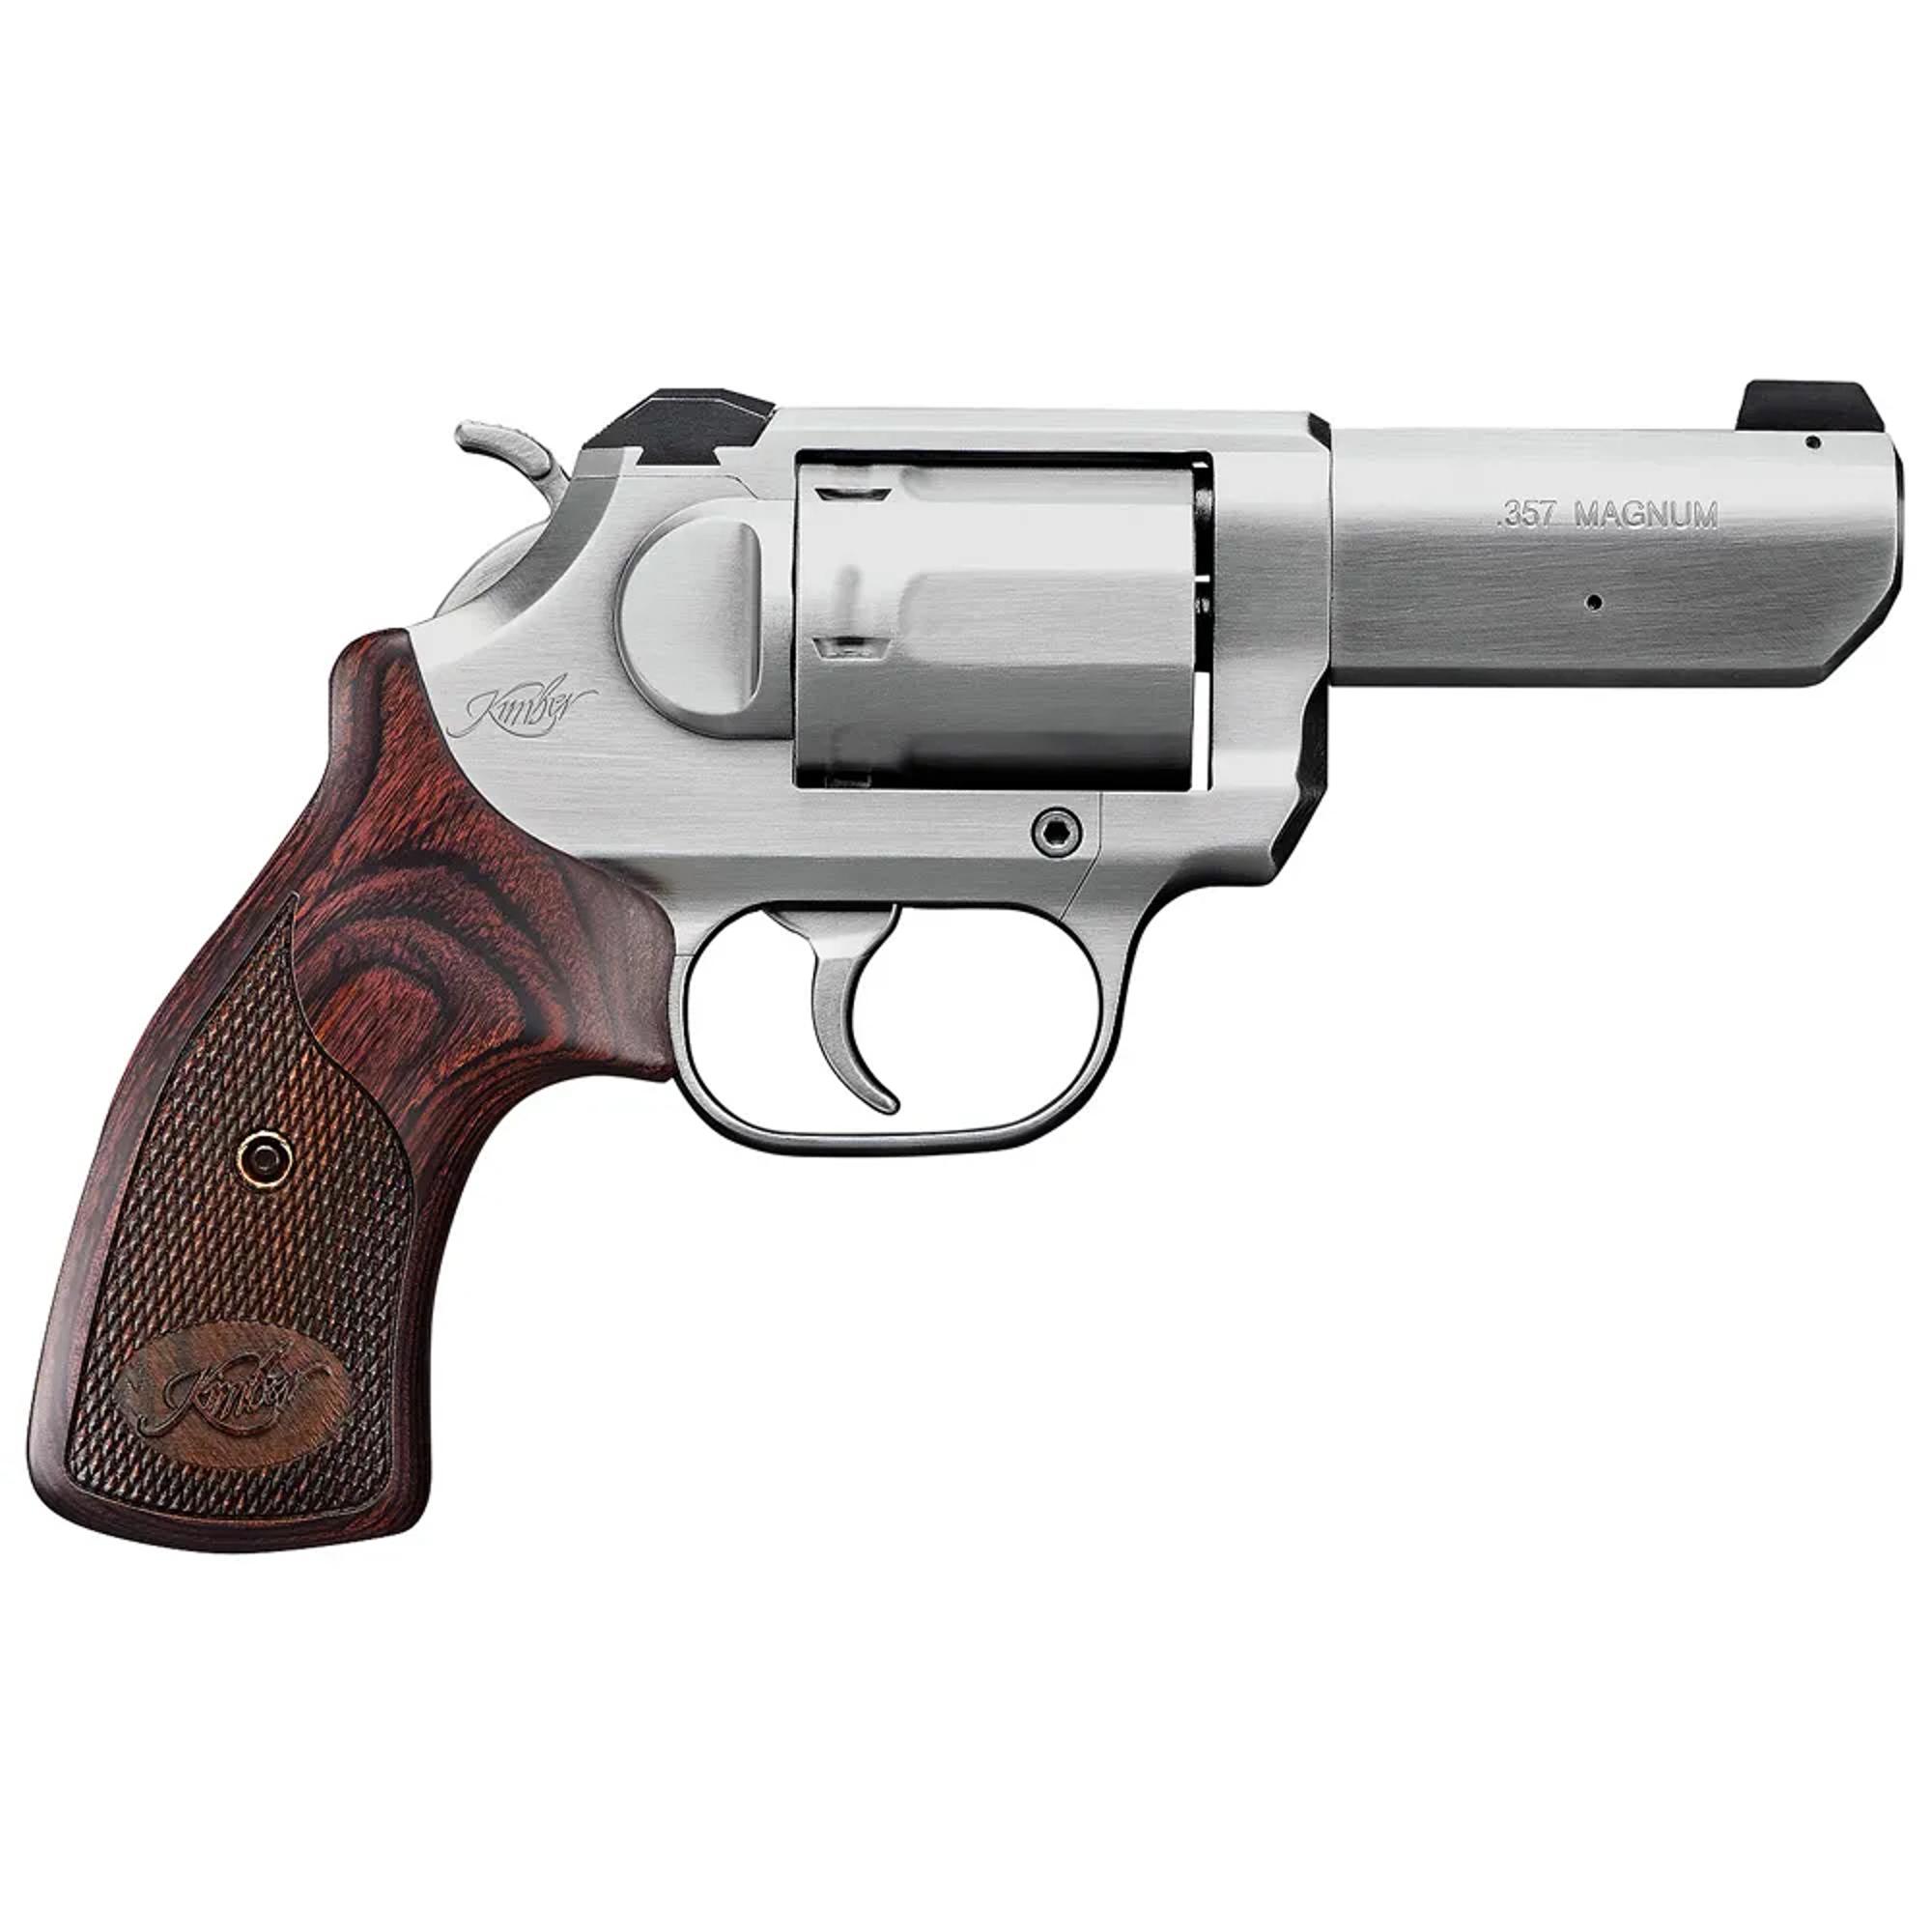 Kimber K6S 357 Magnum 3in Stainless Revolver - 6 Rounds3400016-D23  | 357 MAGNUM | 3400016-D23 | 669278340166